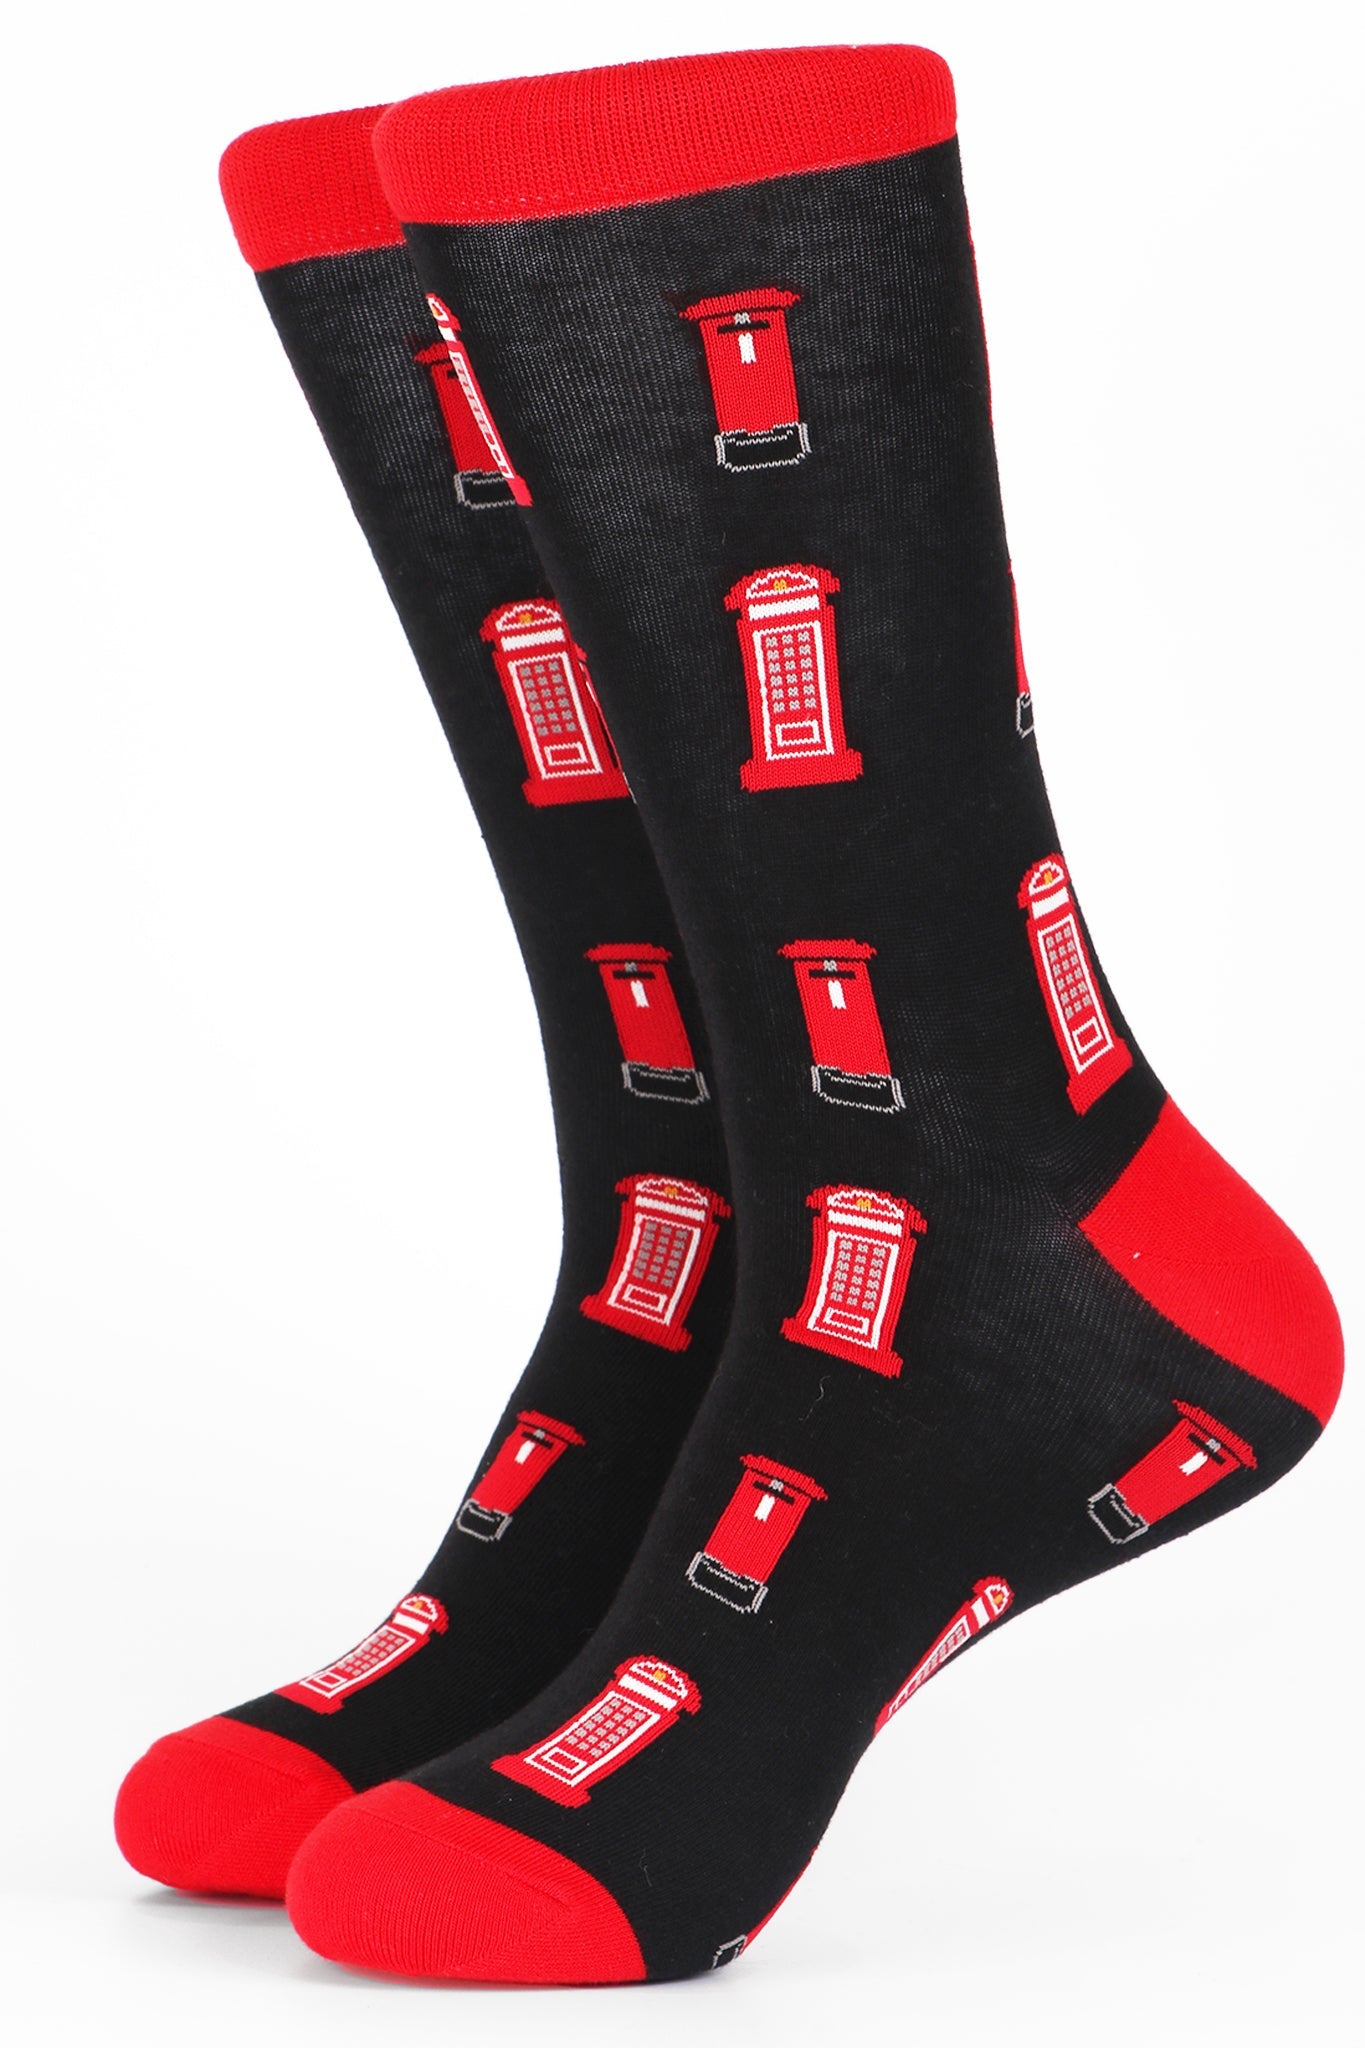 black dress socks with an all over pattern of red telephone and letter boxes